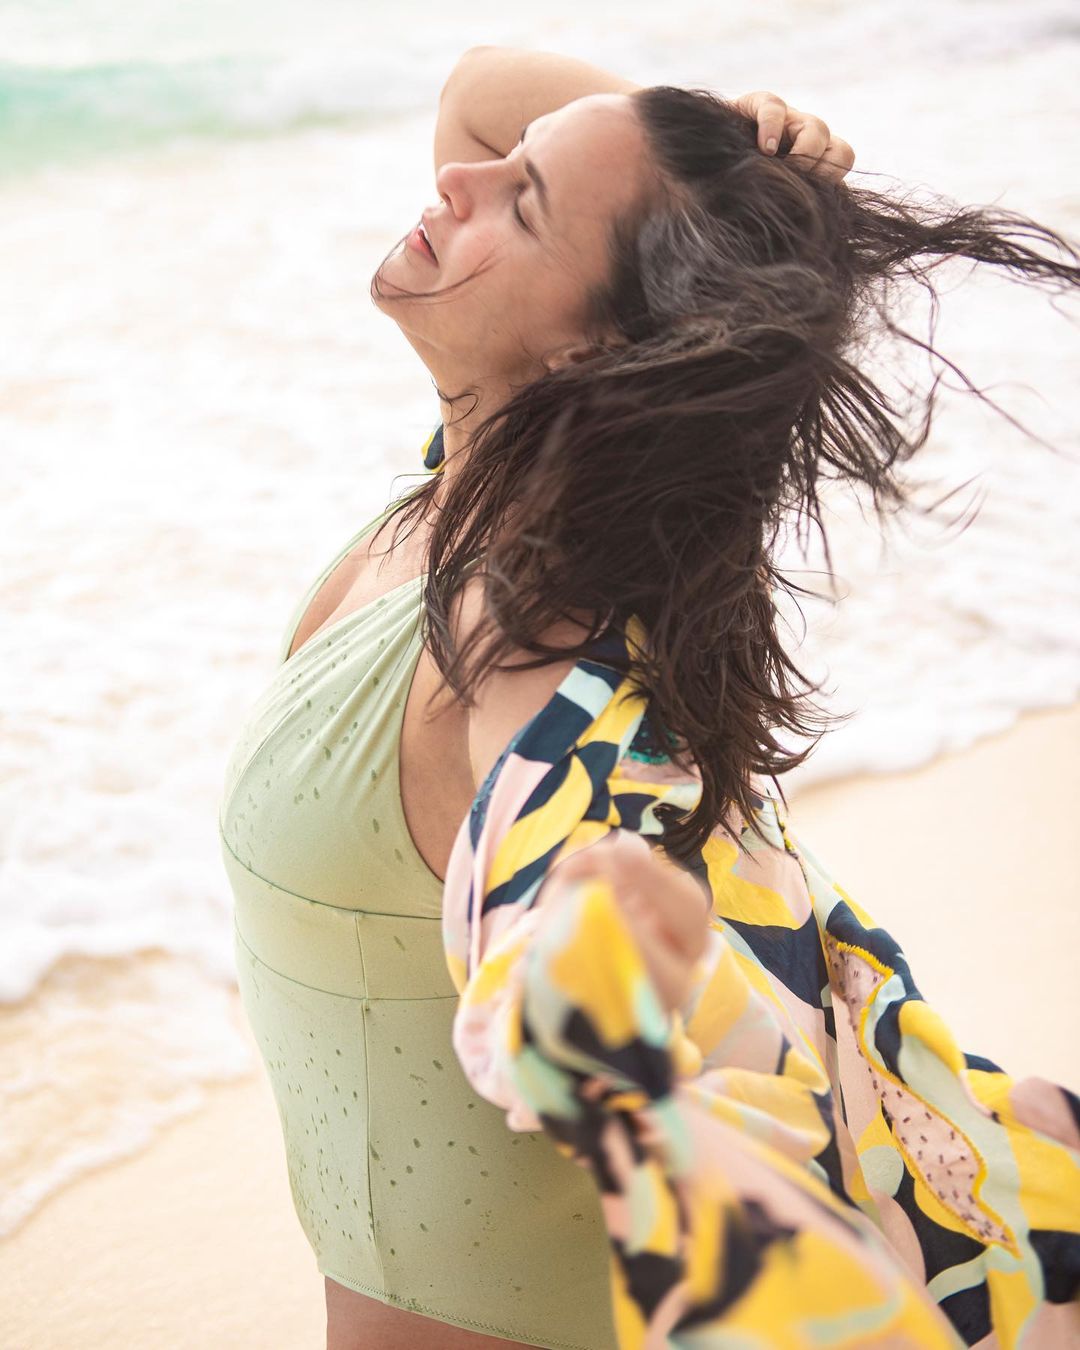 Neha Dhupia clearly seems to be enjoying the sun, sand and sea in these pictures. She donned a mint green bathing suit and paired it with a muti-coloured kimono